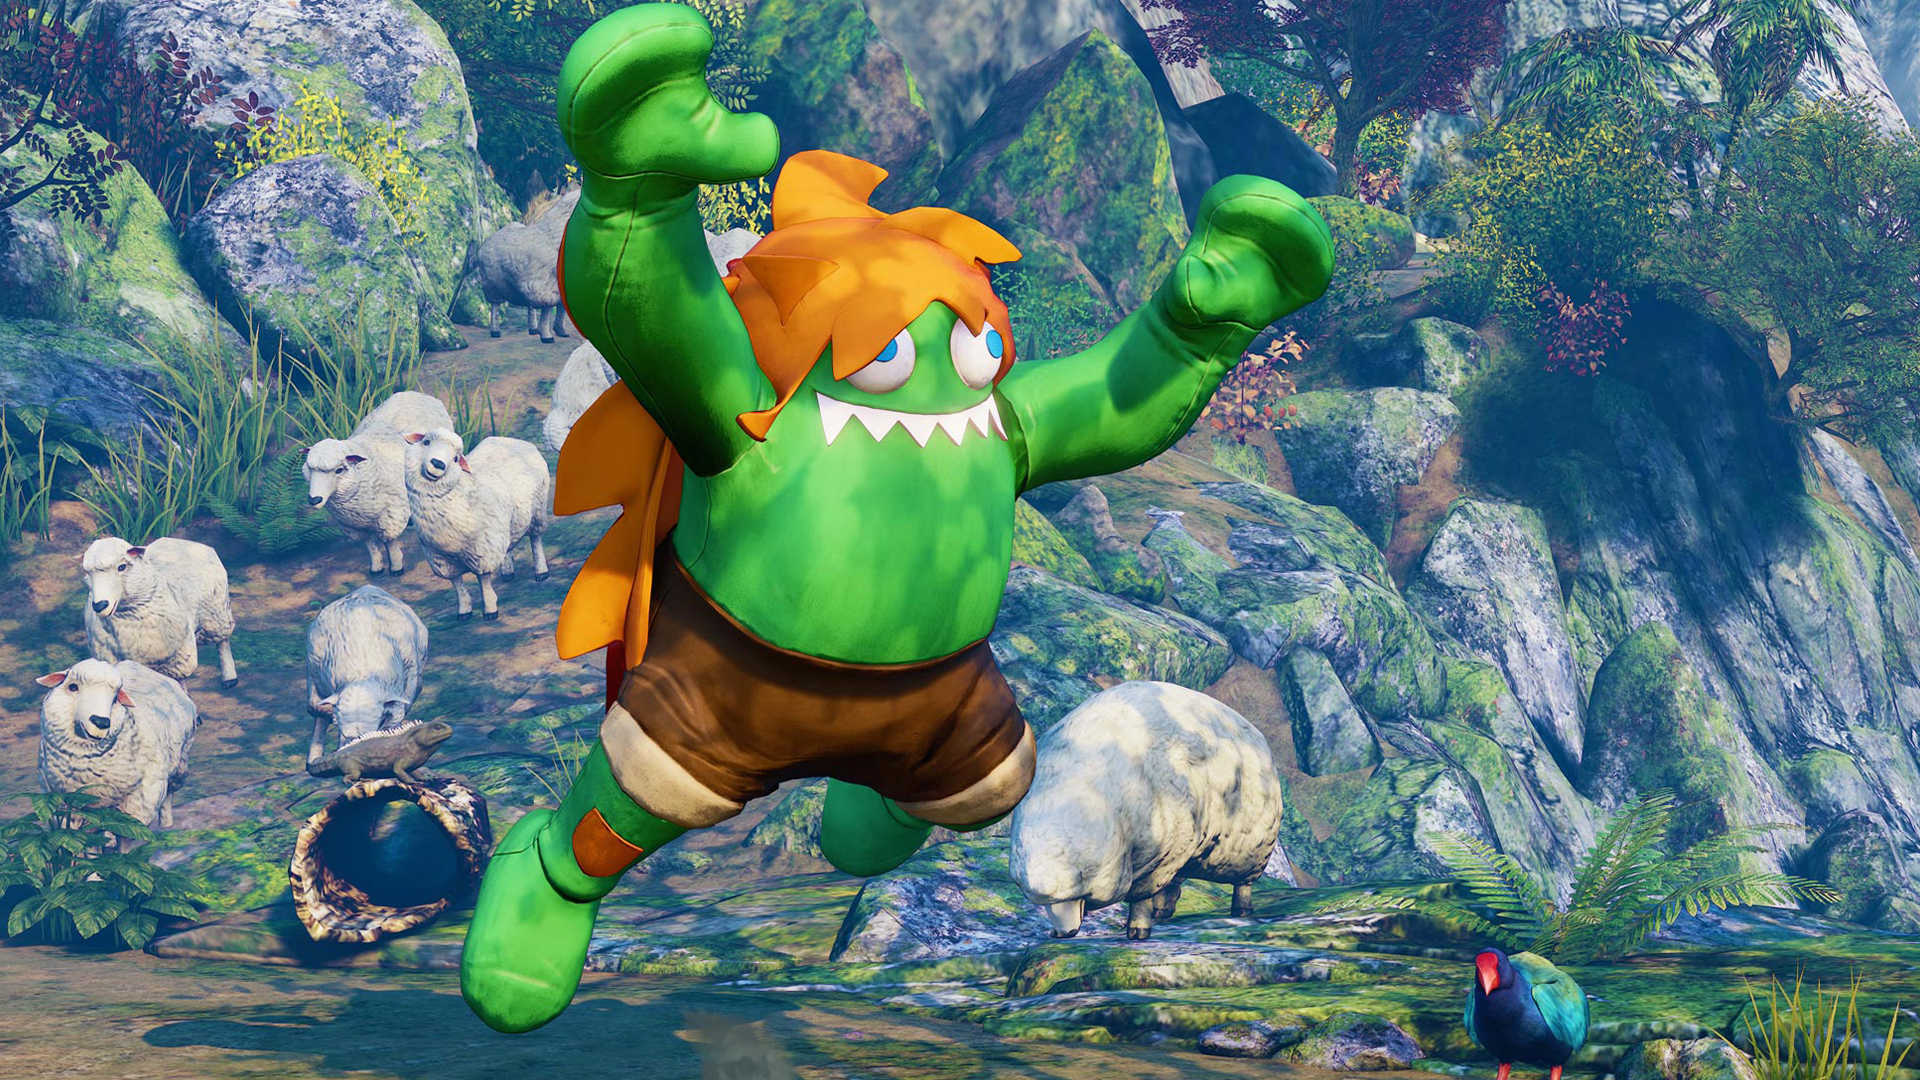 Blanka in Street Fighter 6 - Complete Guide, Moves & Top Pro Players